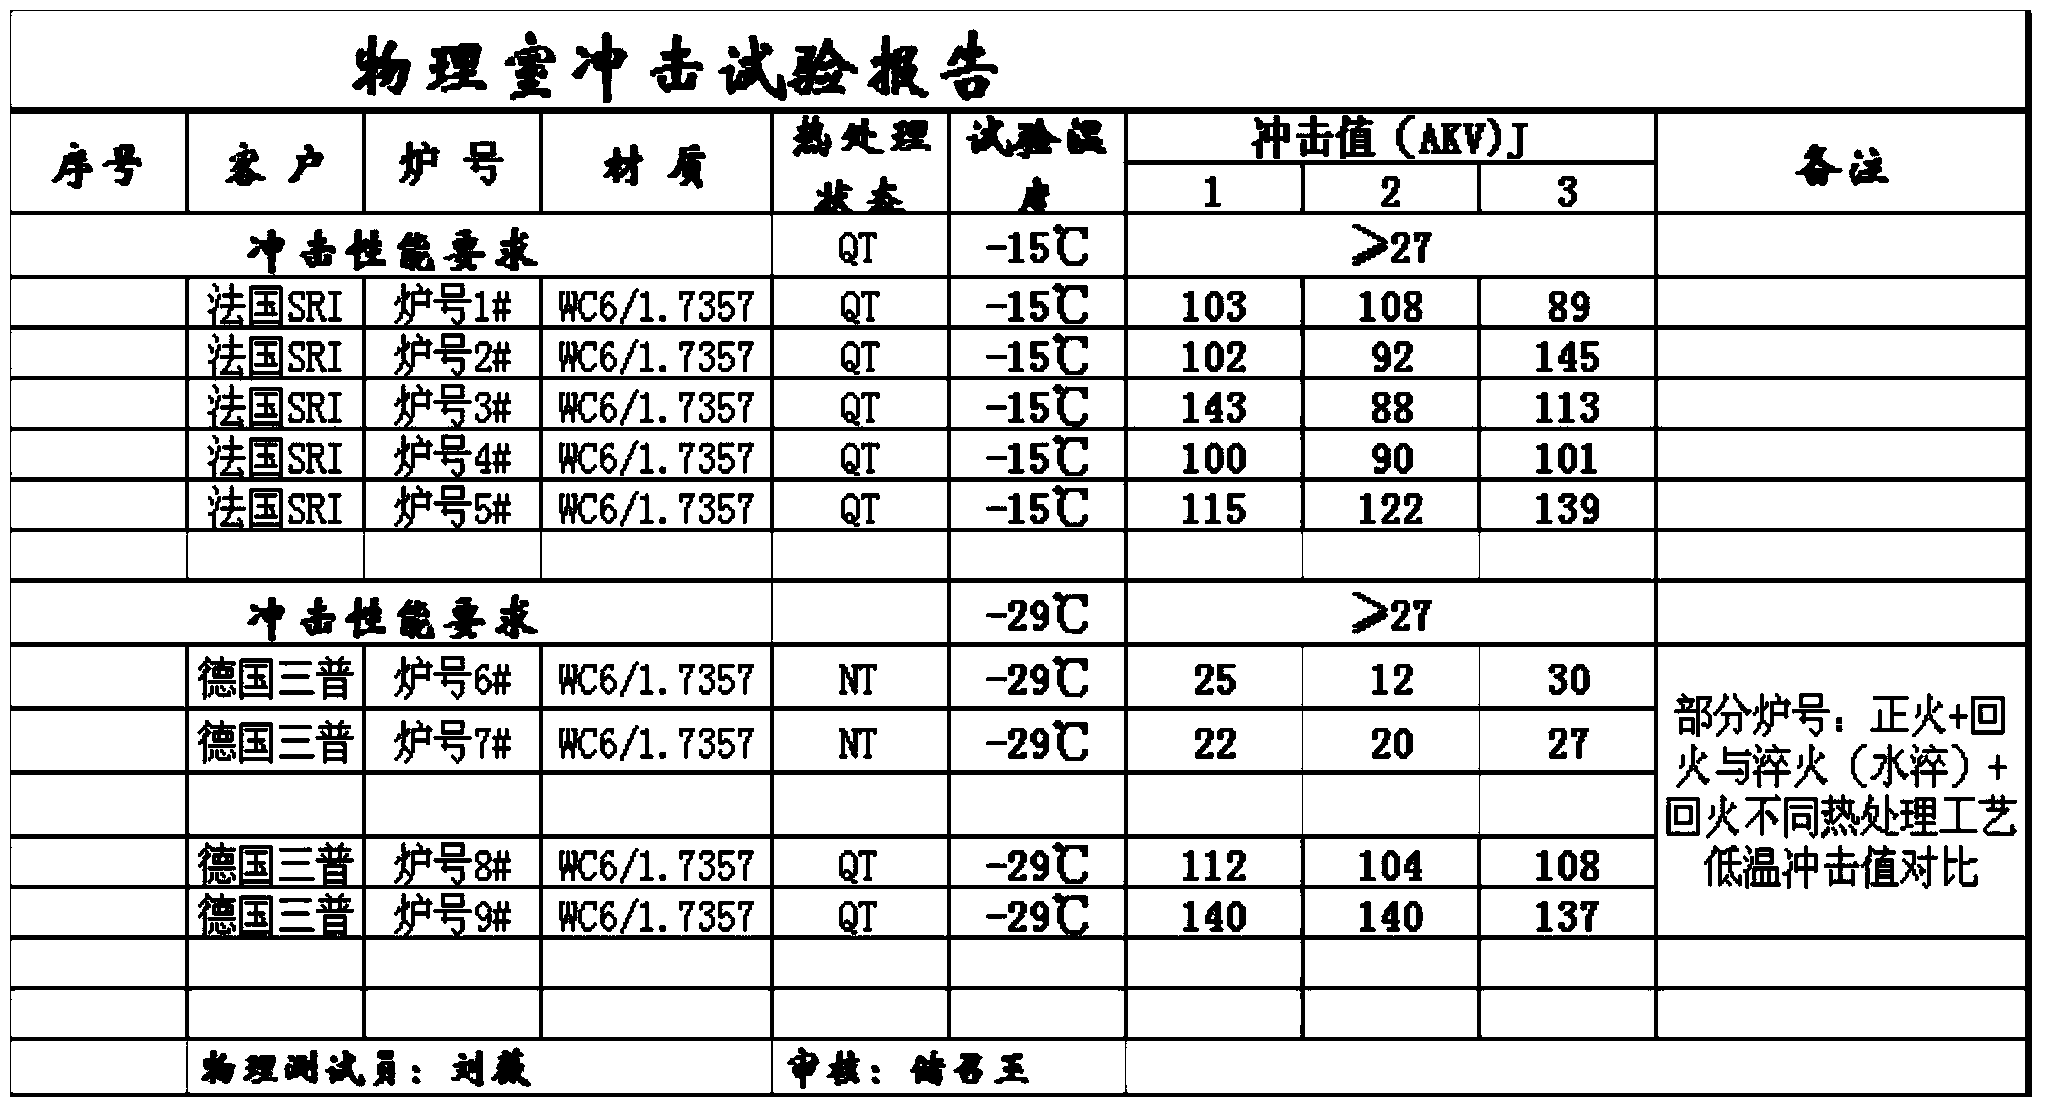 Heat treatment method for improving low-temperature toughness of WC6-1.7357 material